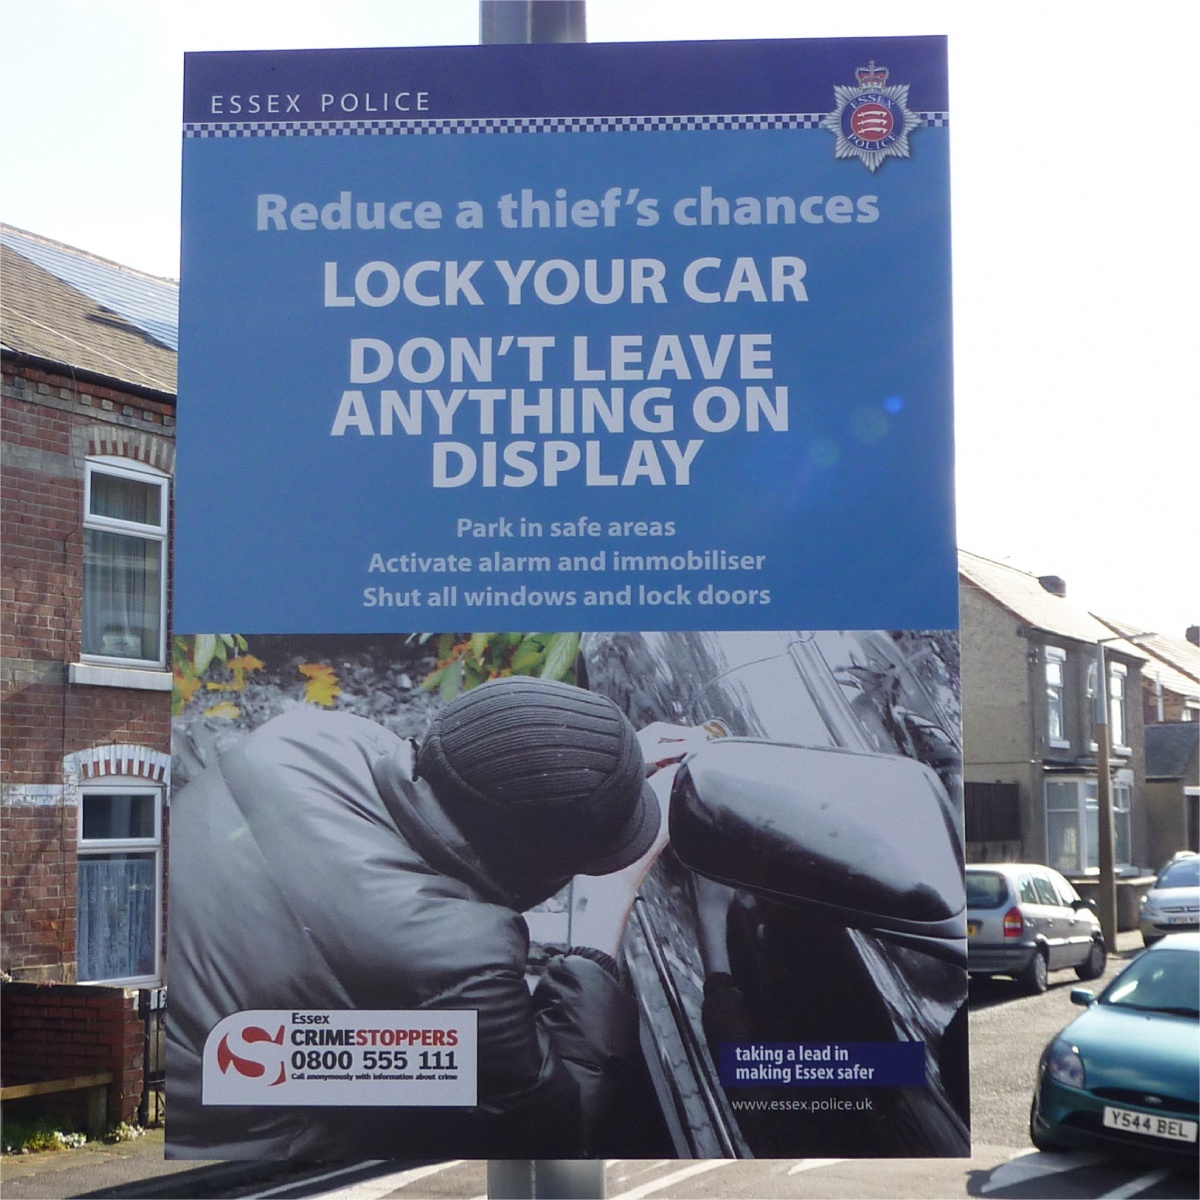 crimestoppers sign advising public to hide valuables